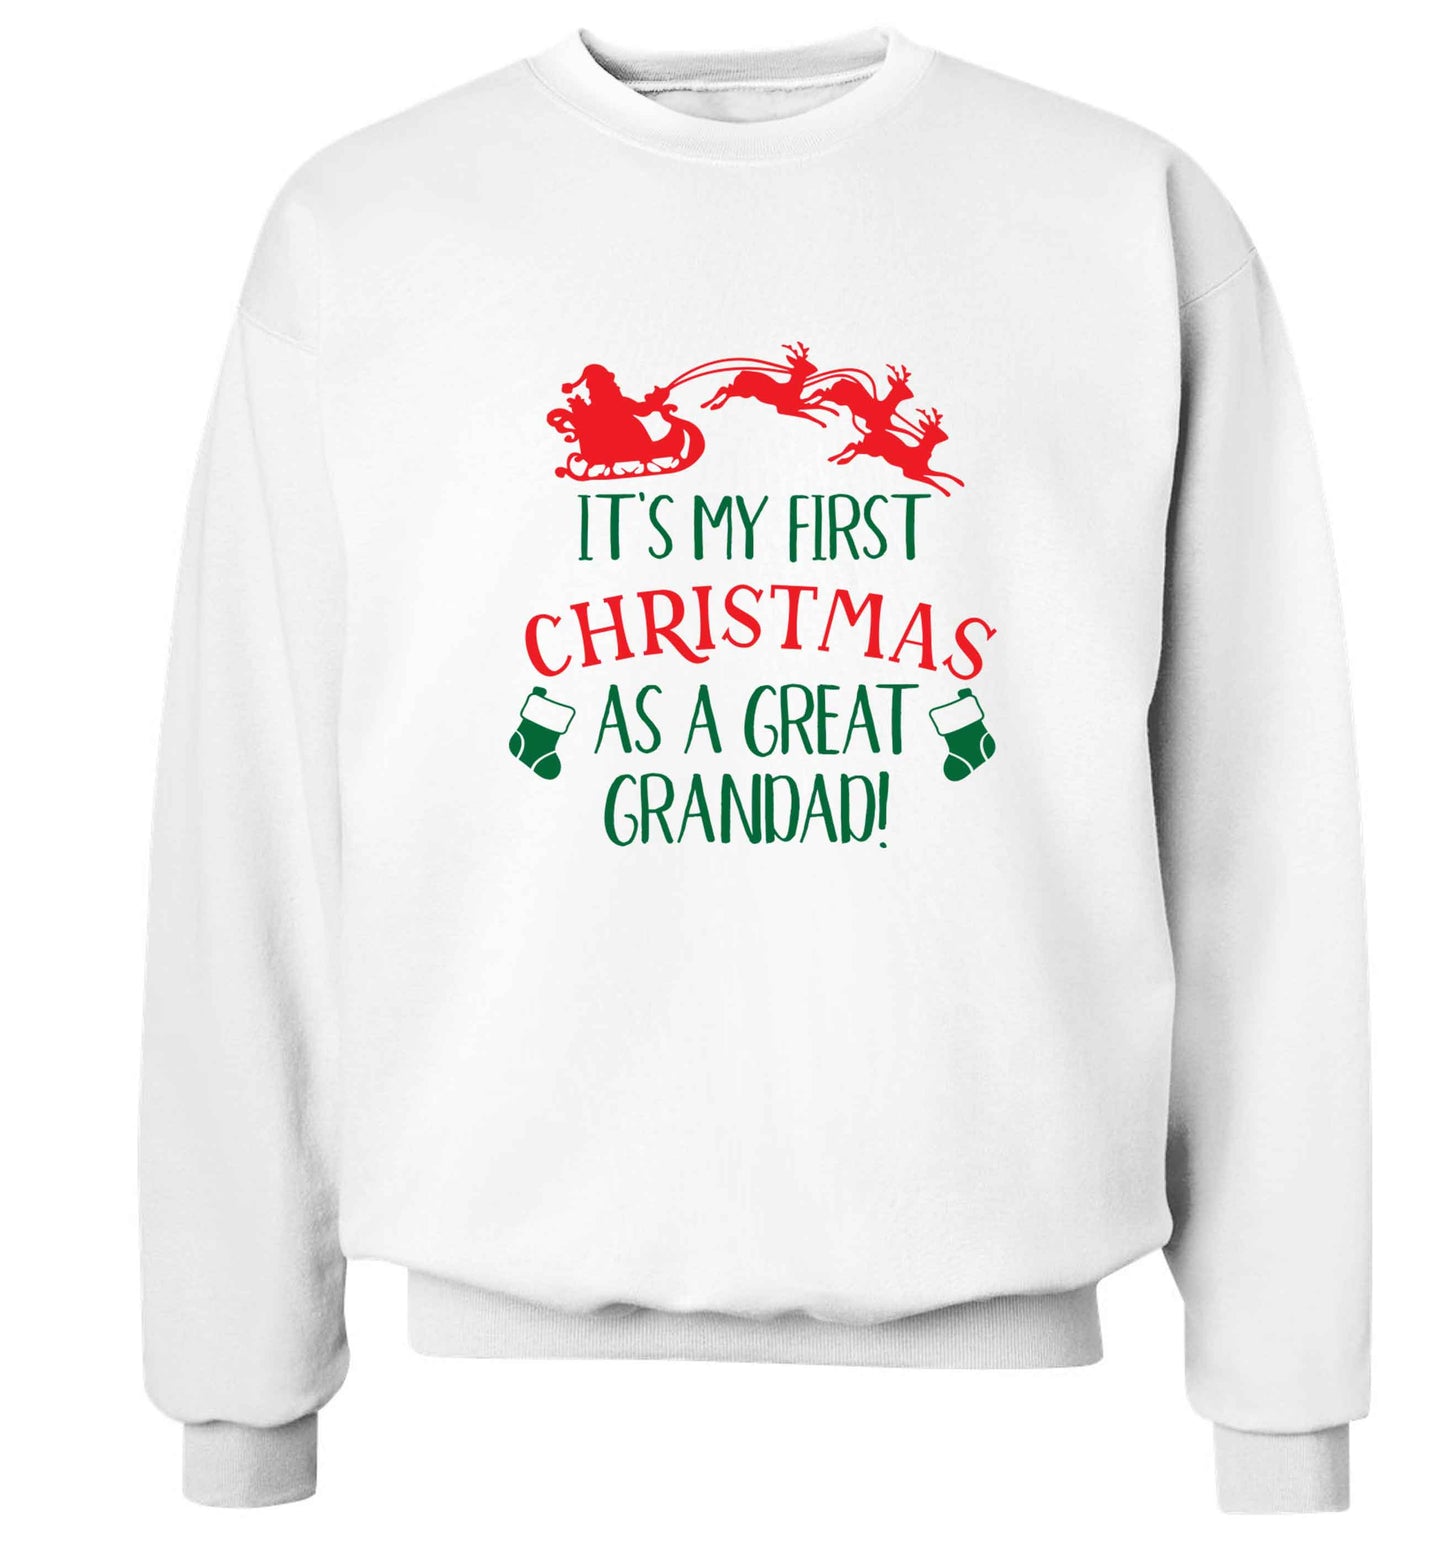 It's my first Christmas as a great grandad! Adult's unisex white Sweater 2XL